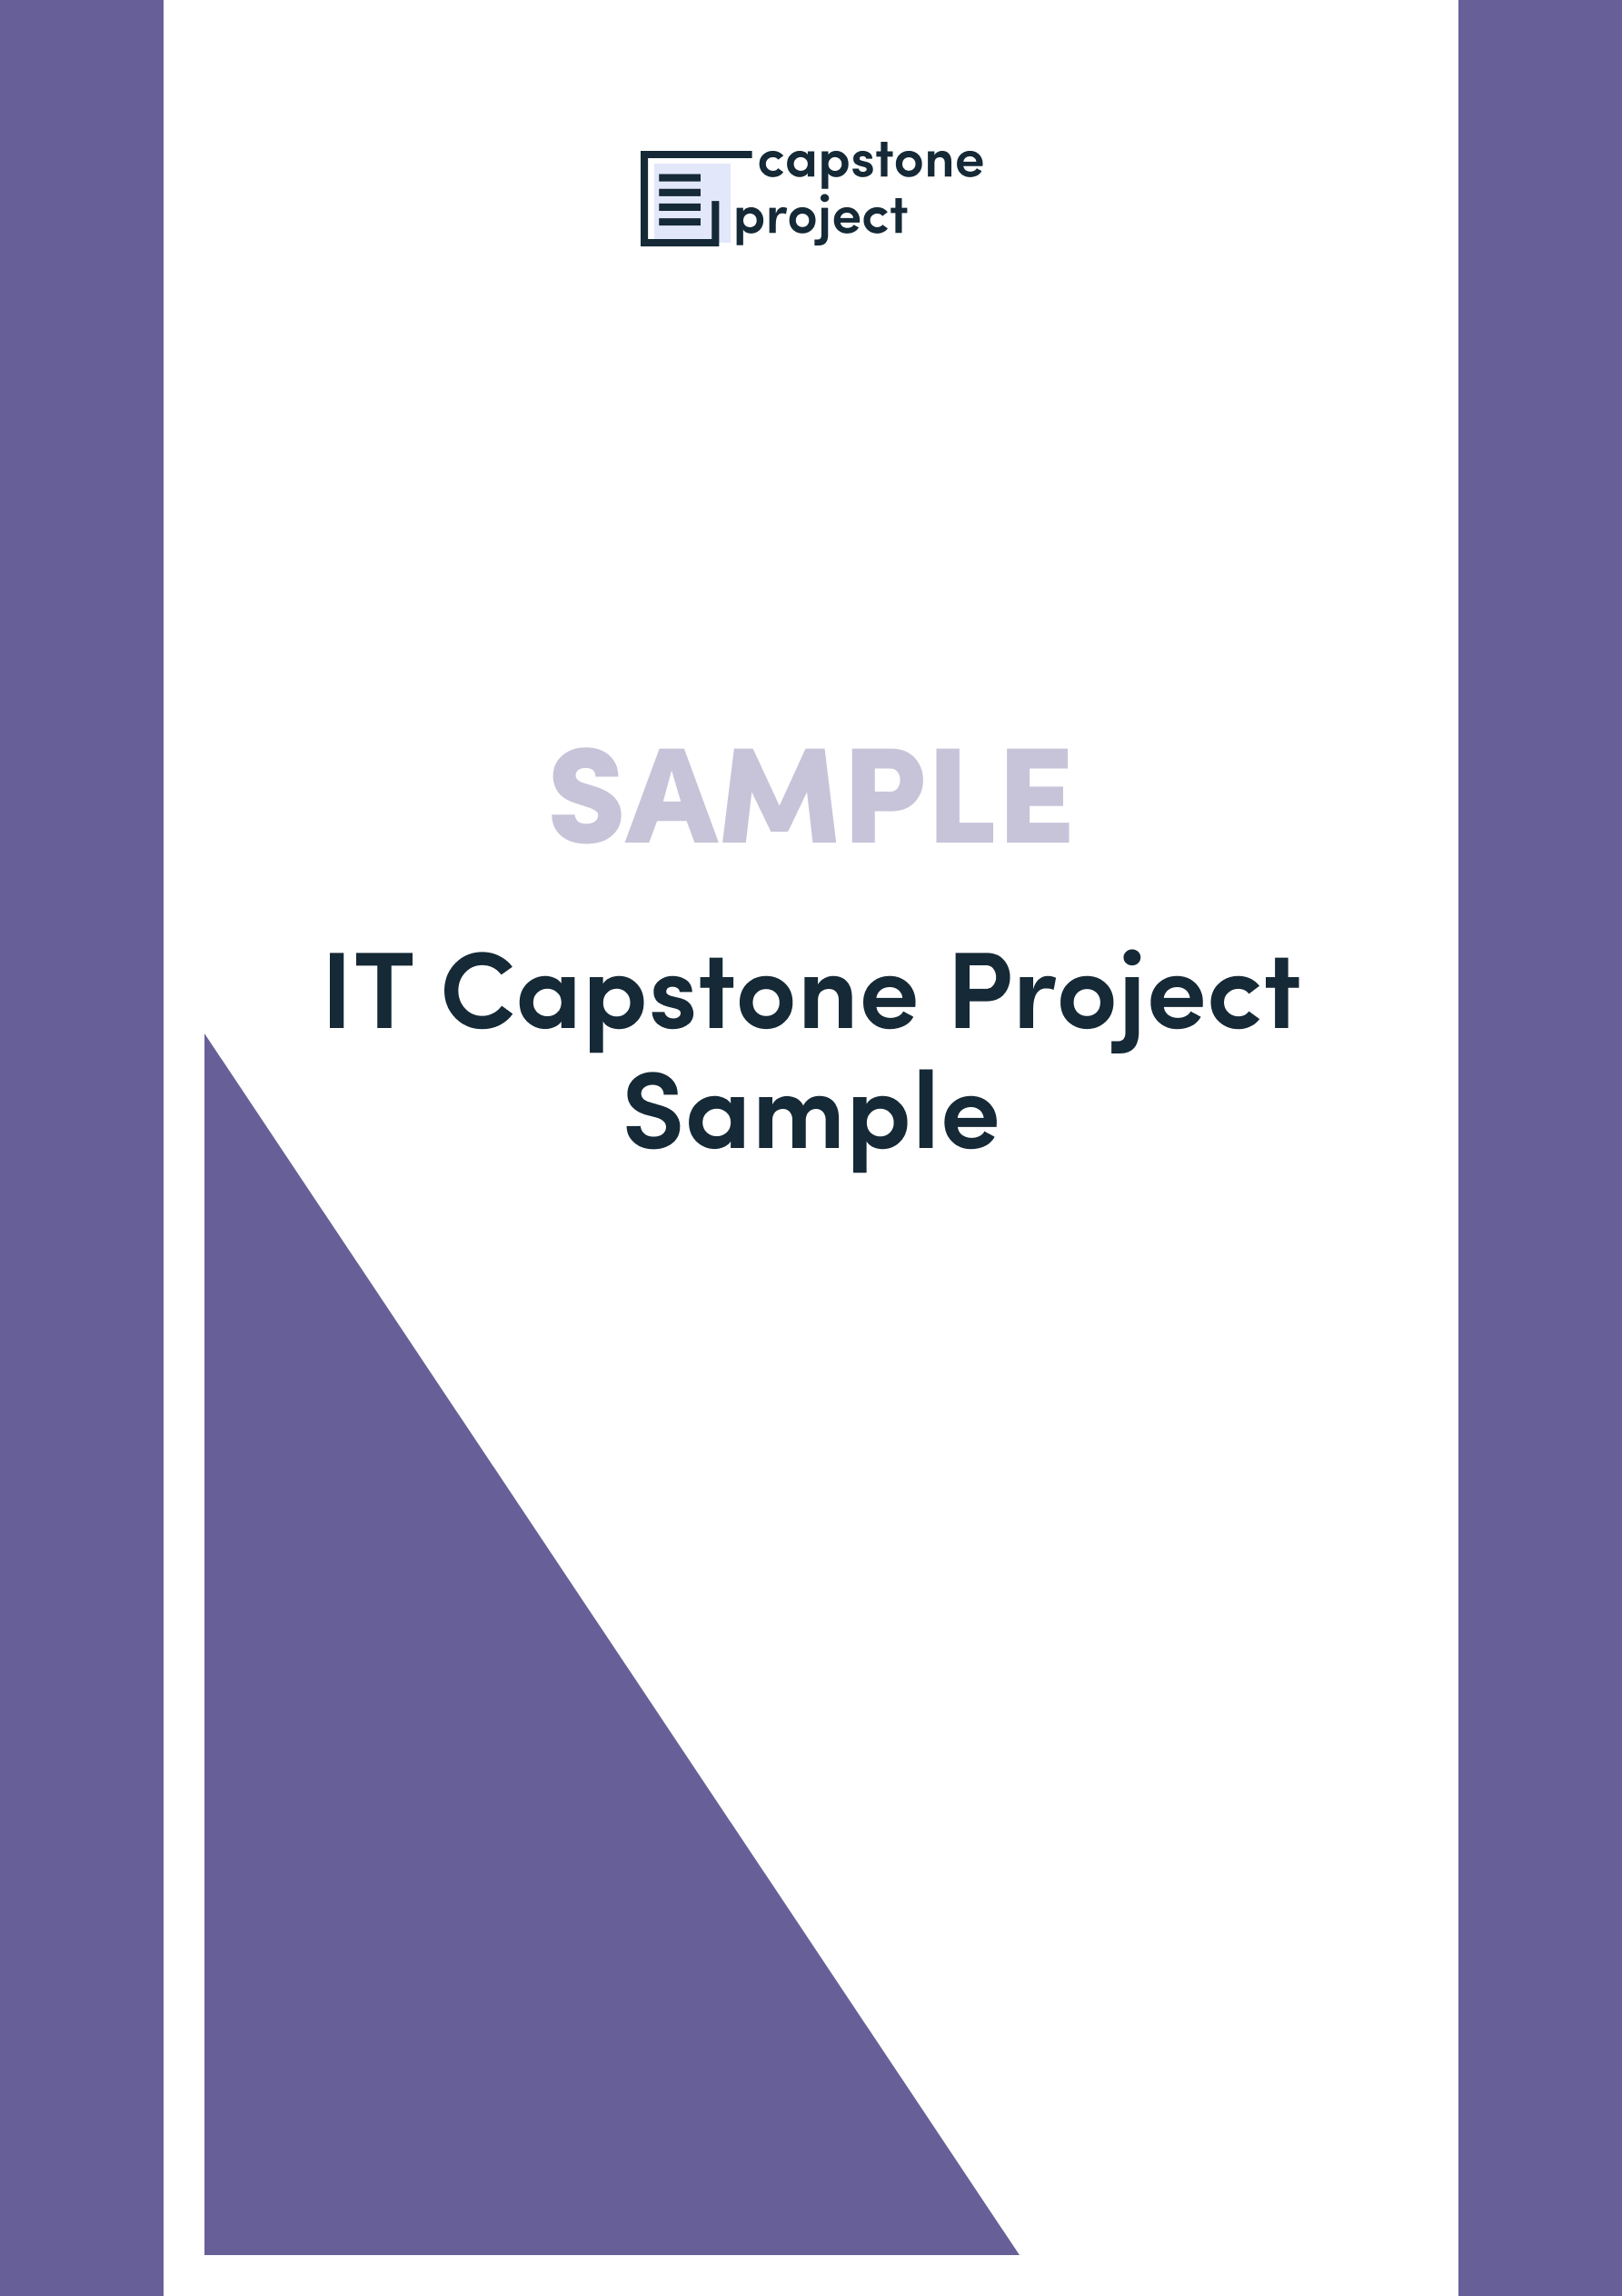 capstone projects data science